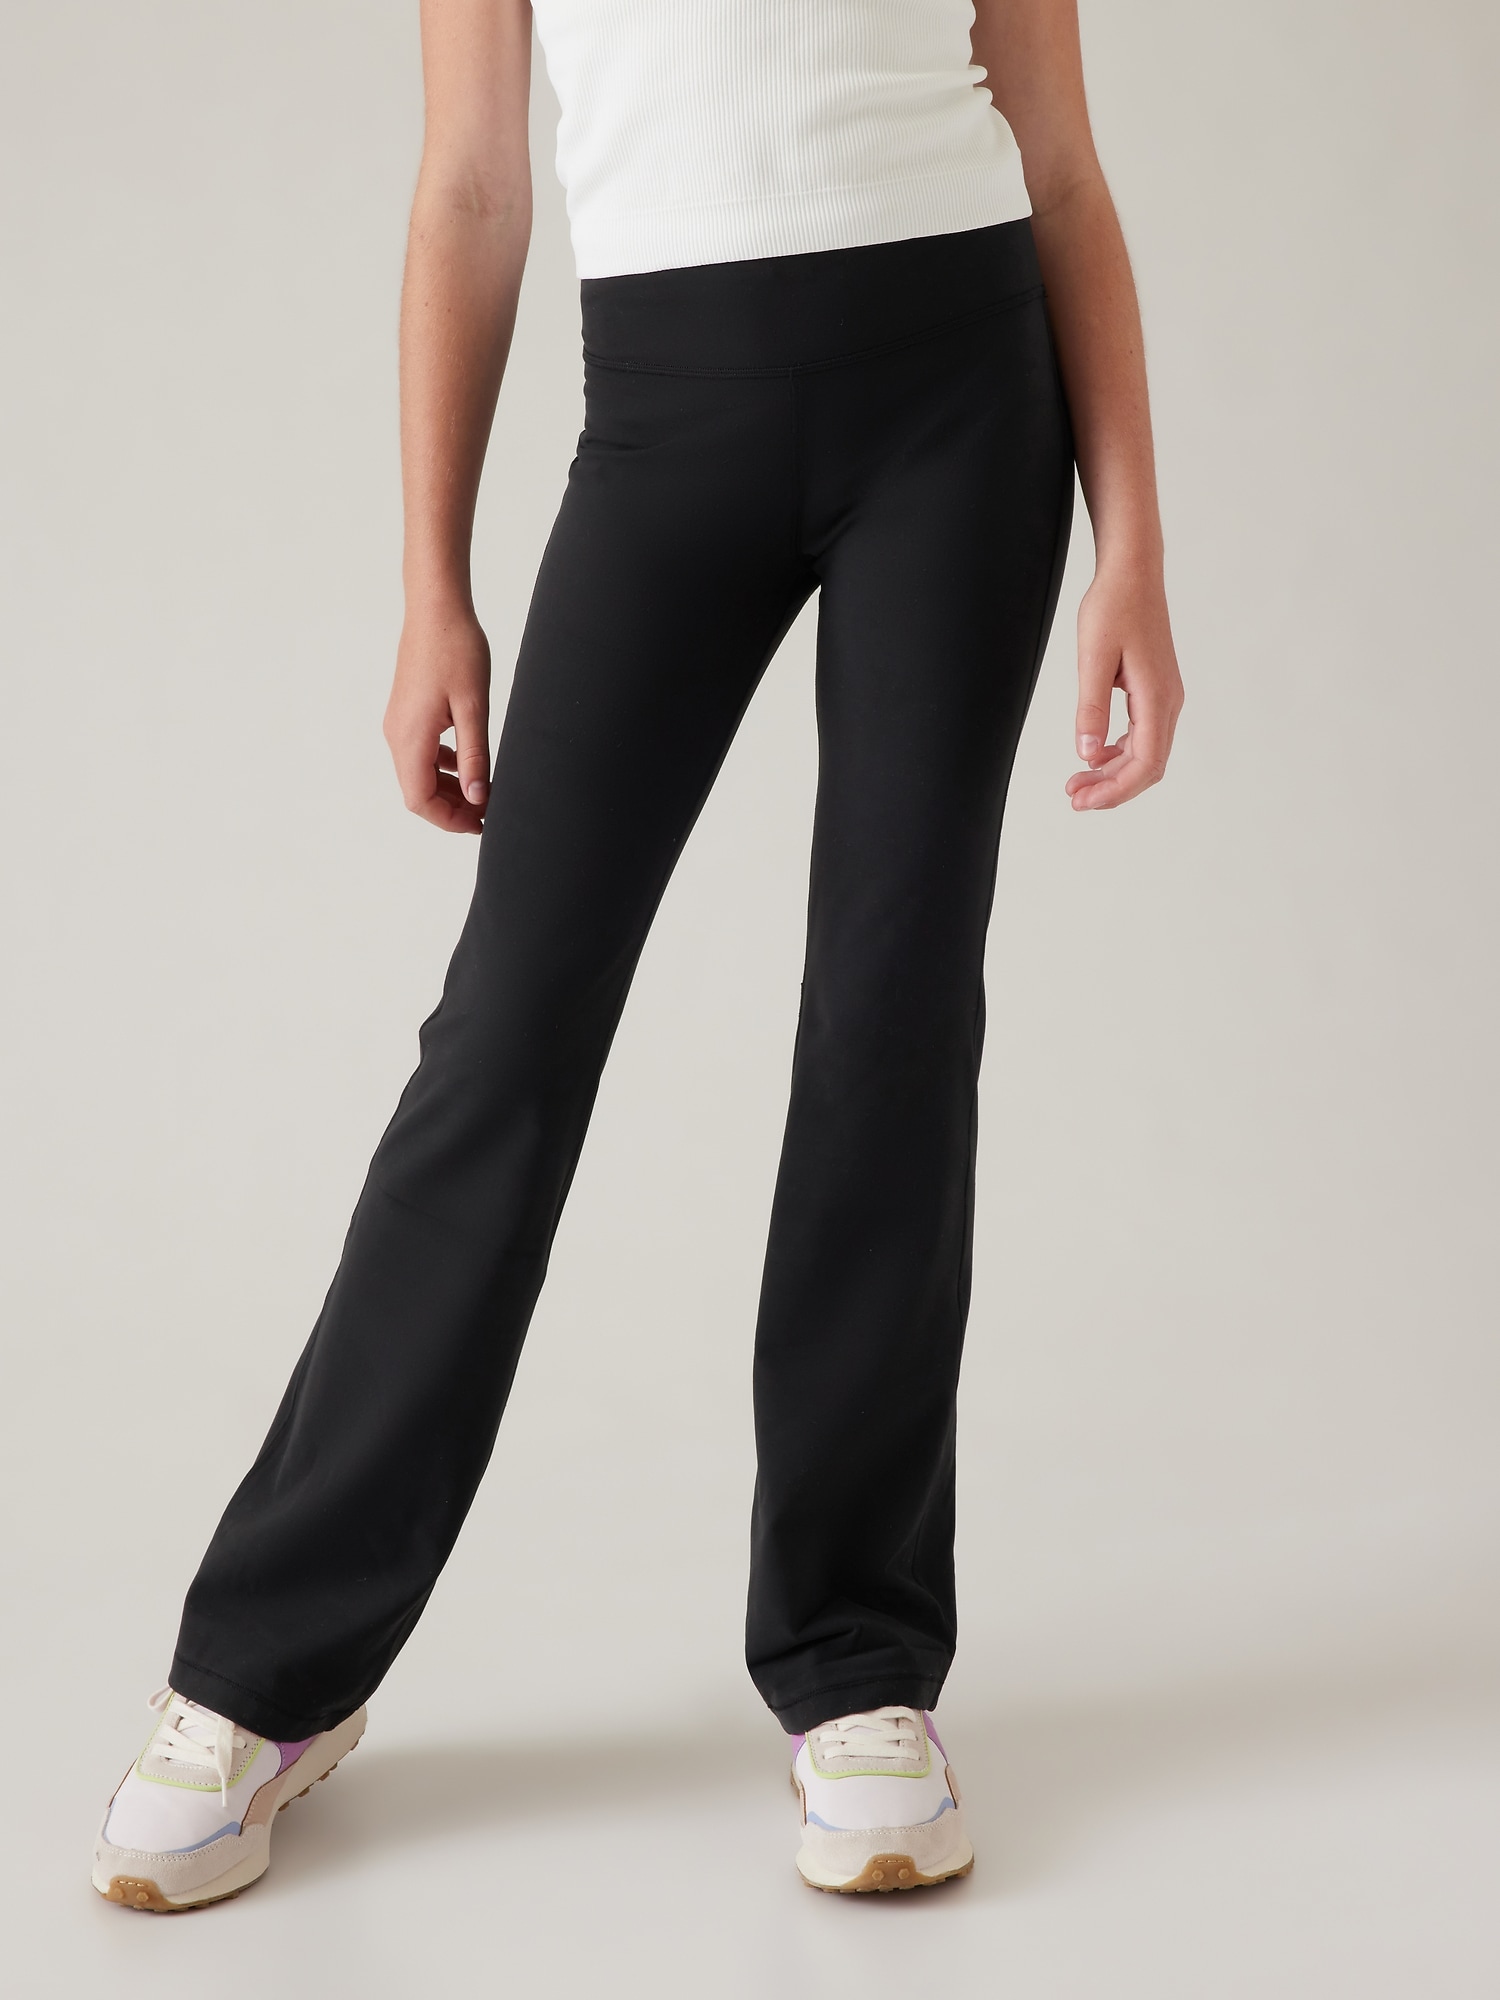 High Waisted Athletic Pants